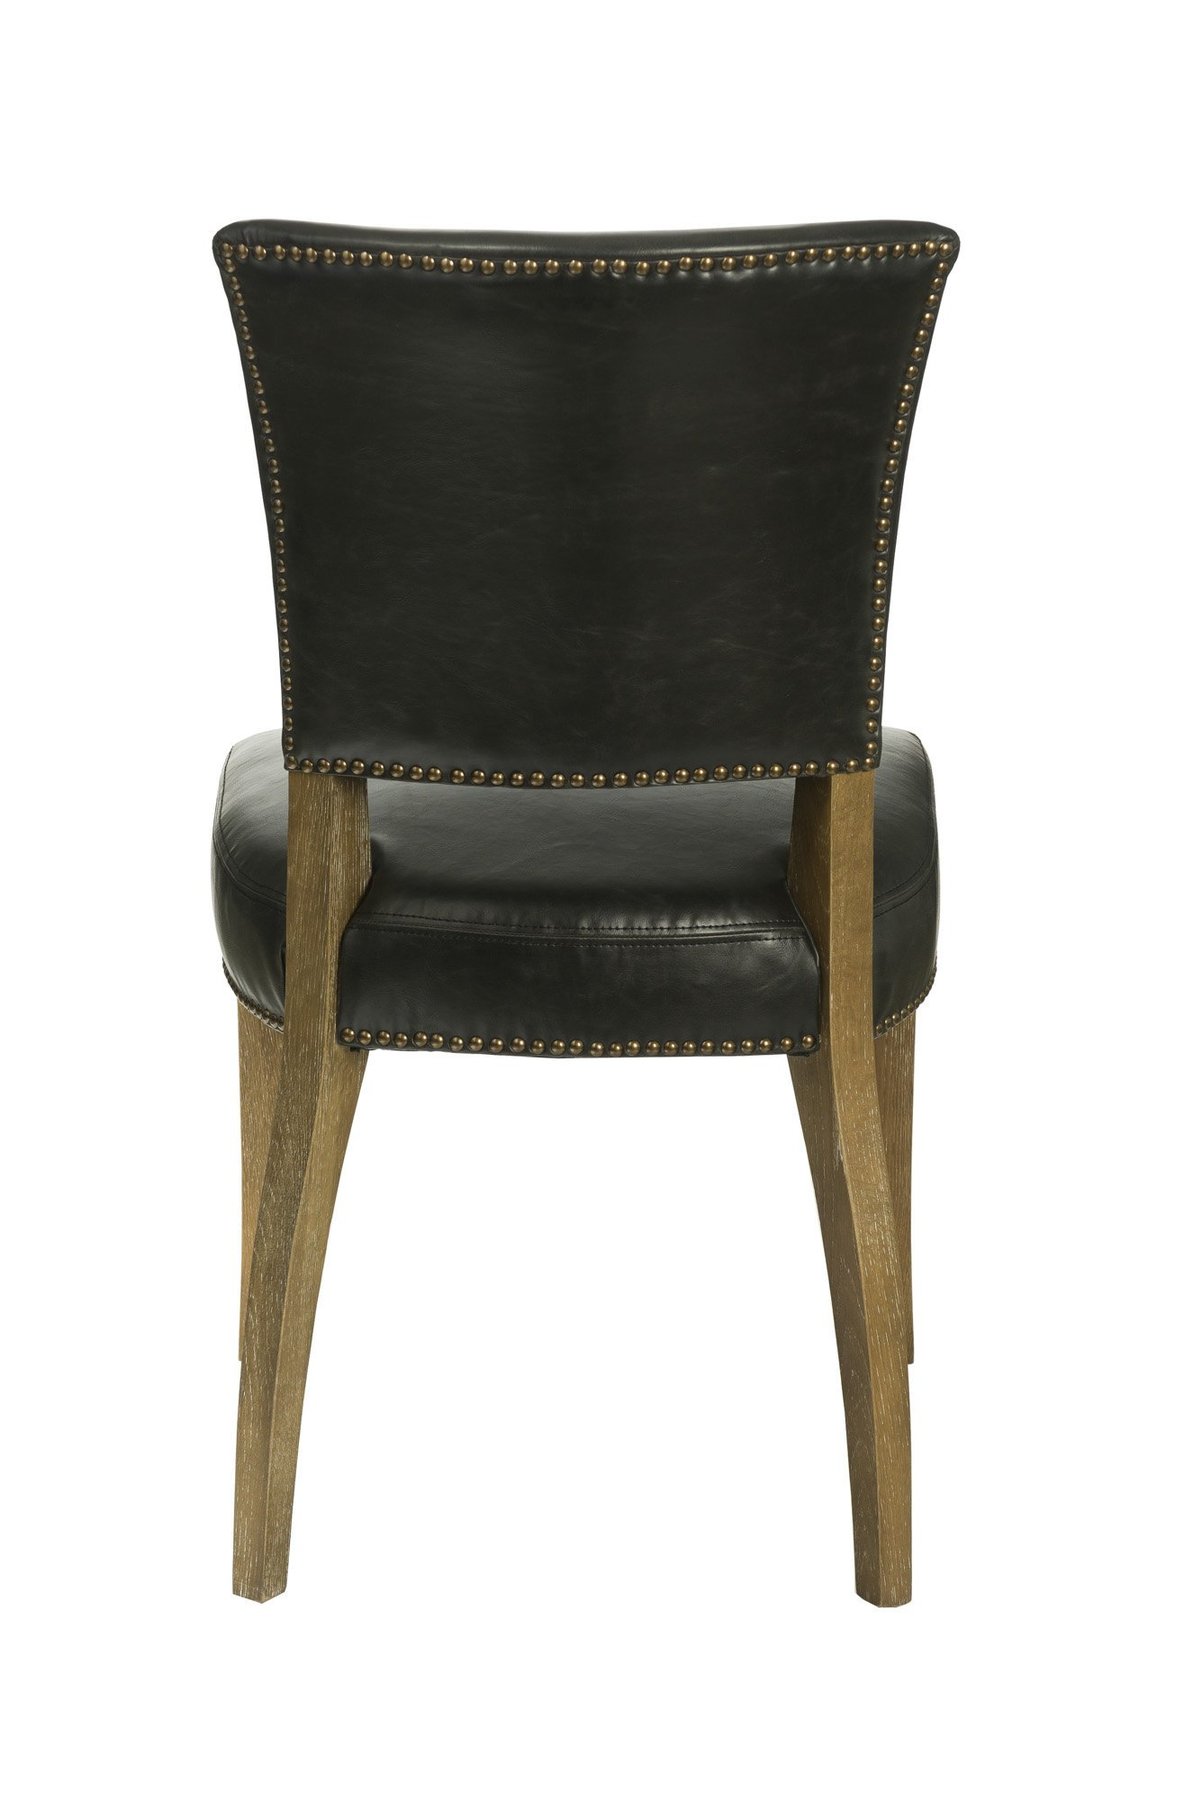 Luther Dining Chair, Black, Q-Living Furniture